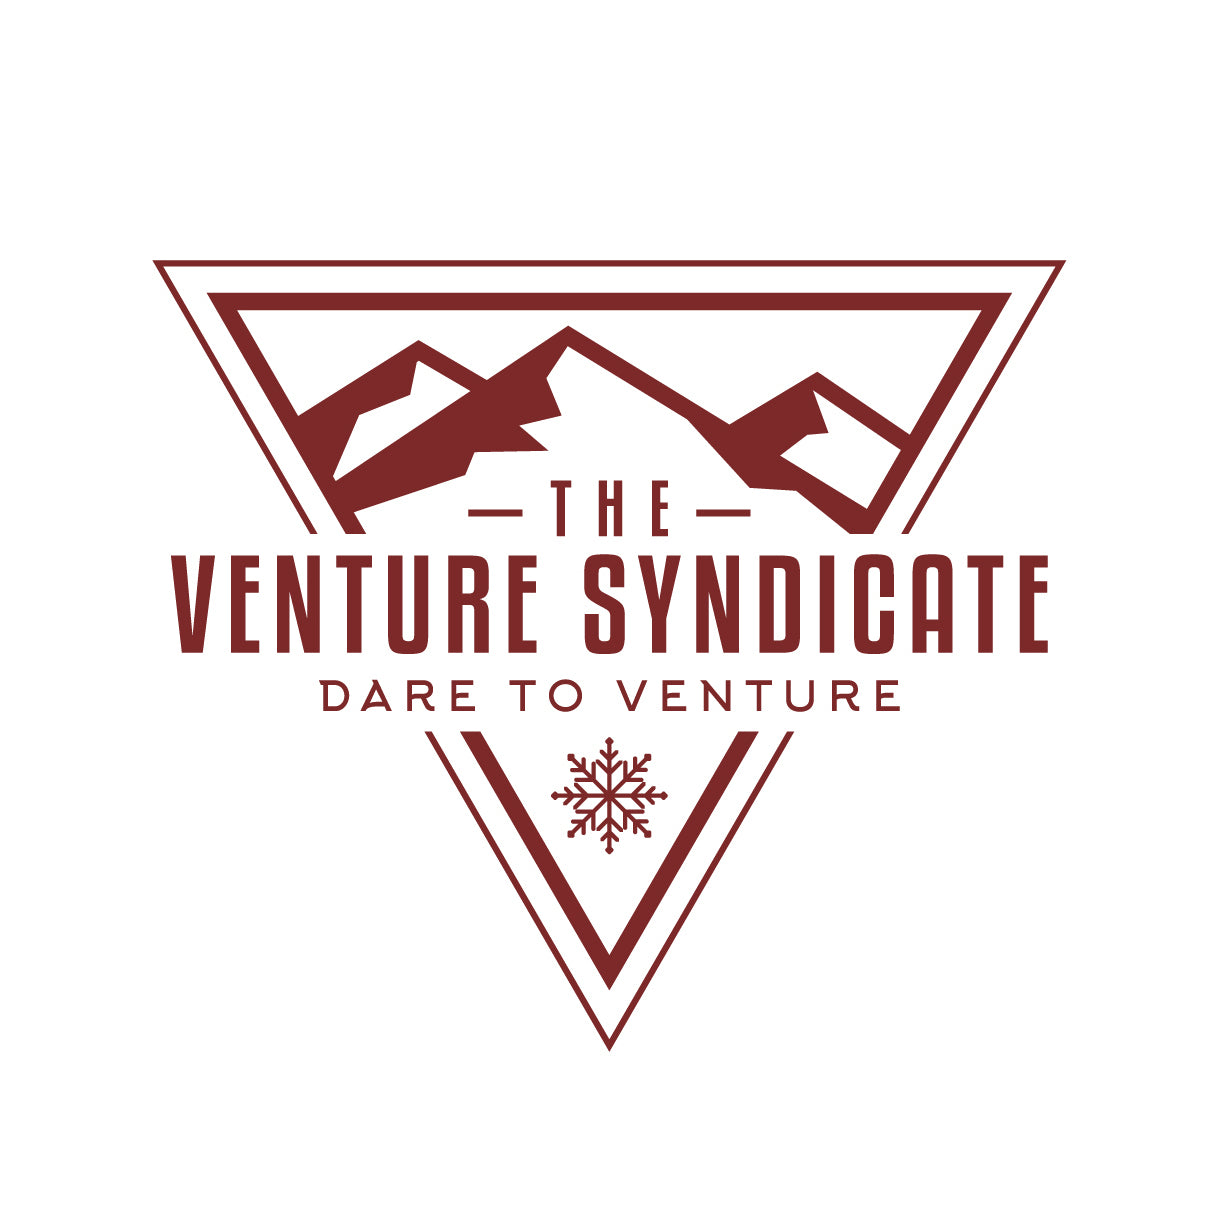 The Venture Syndicate